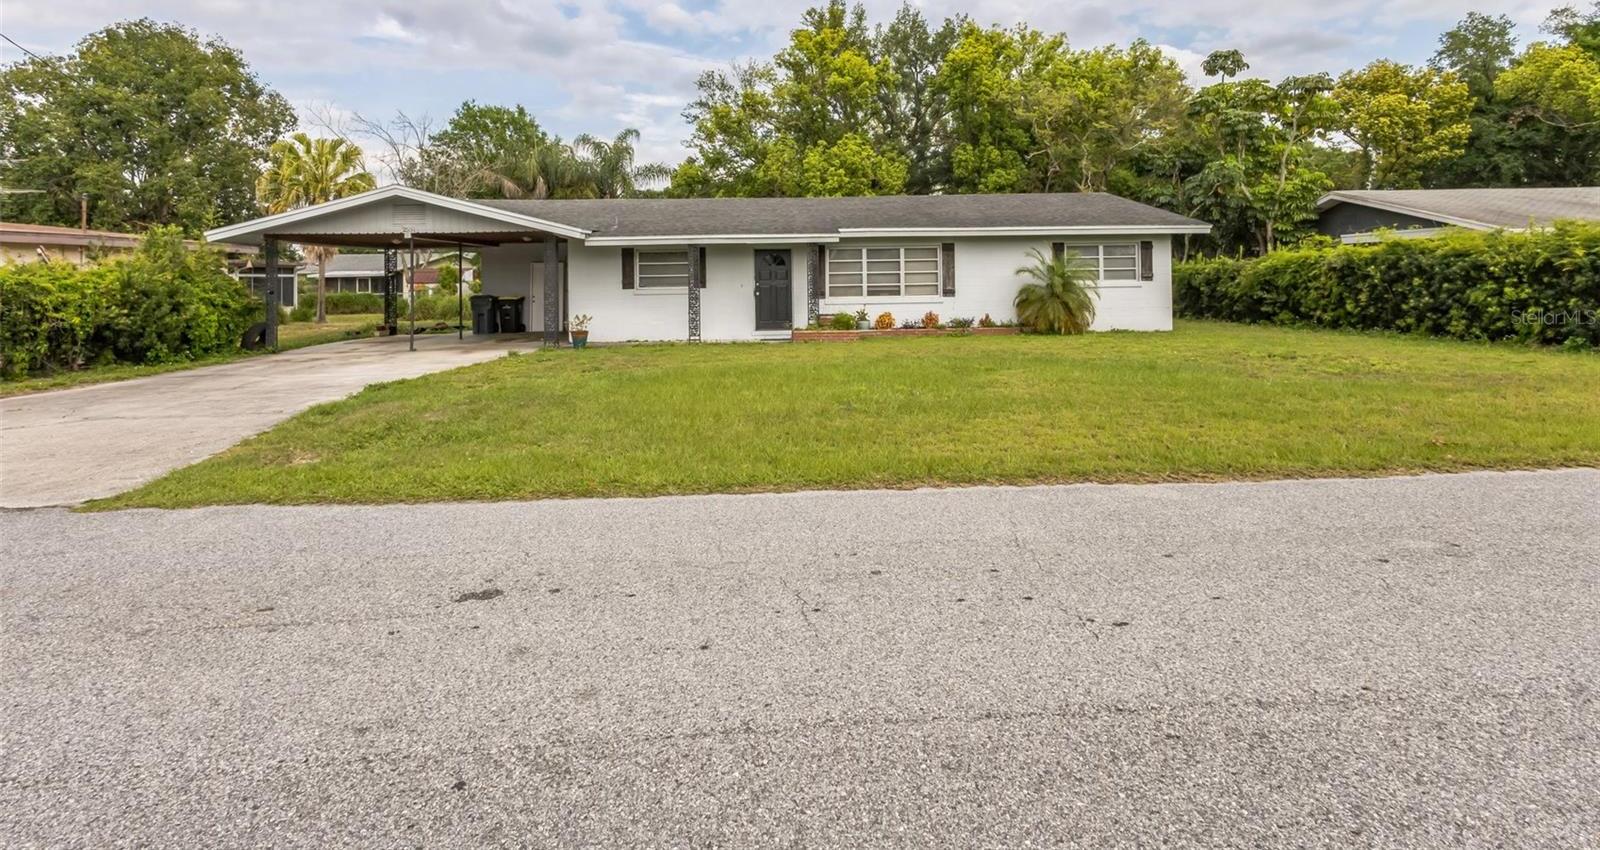 Photo one of 2551 14Th Se St Winter Haven FL 33884 | MLS T3513135